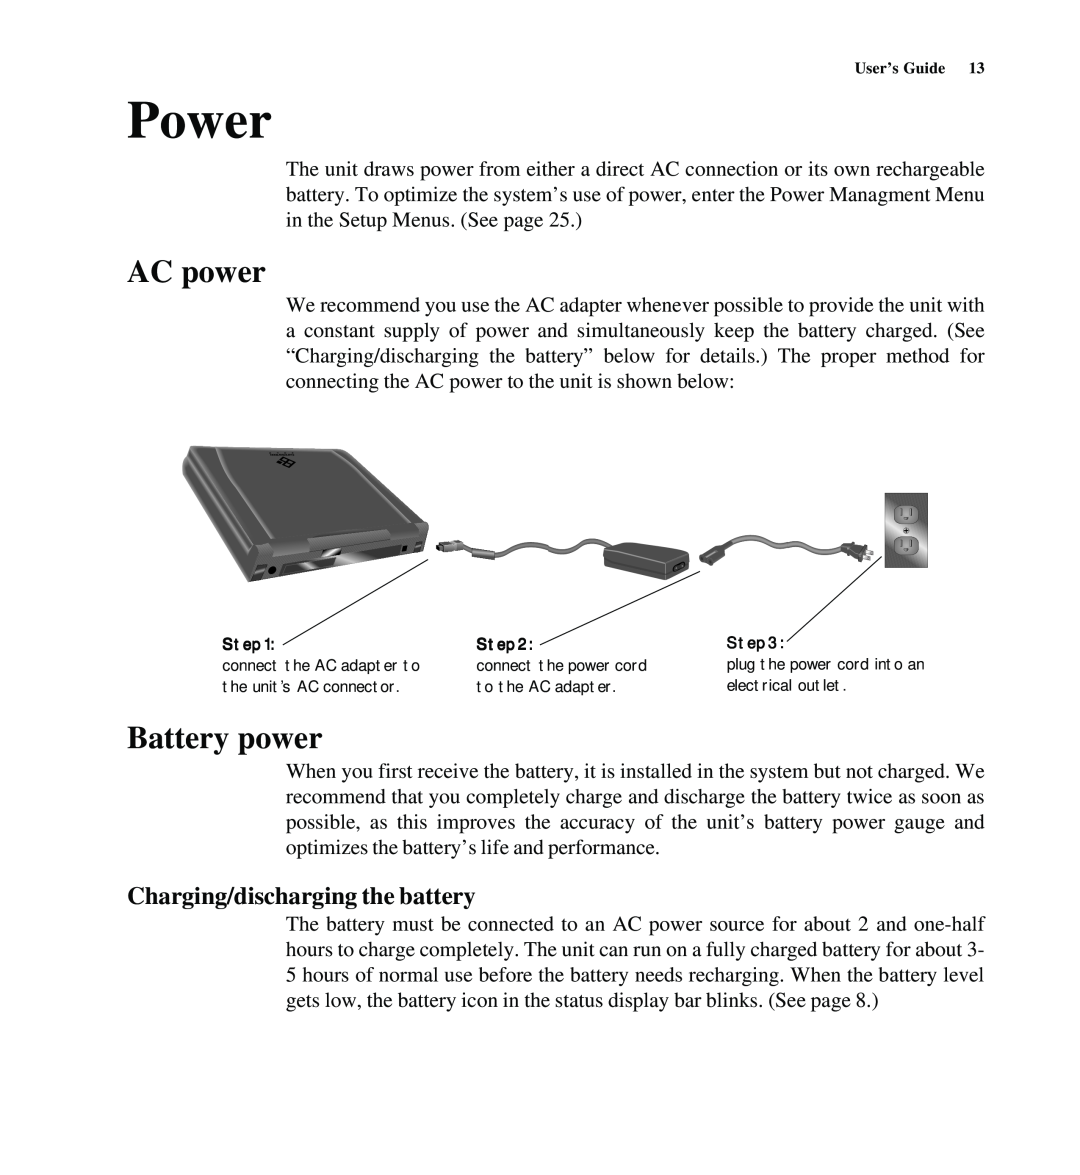 Gateway SYSMAN017AAUS manual Power, AC power, Battery power, Charging/discharging the battery 